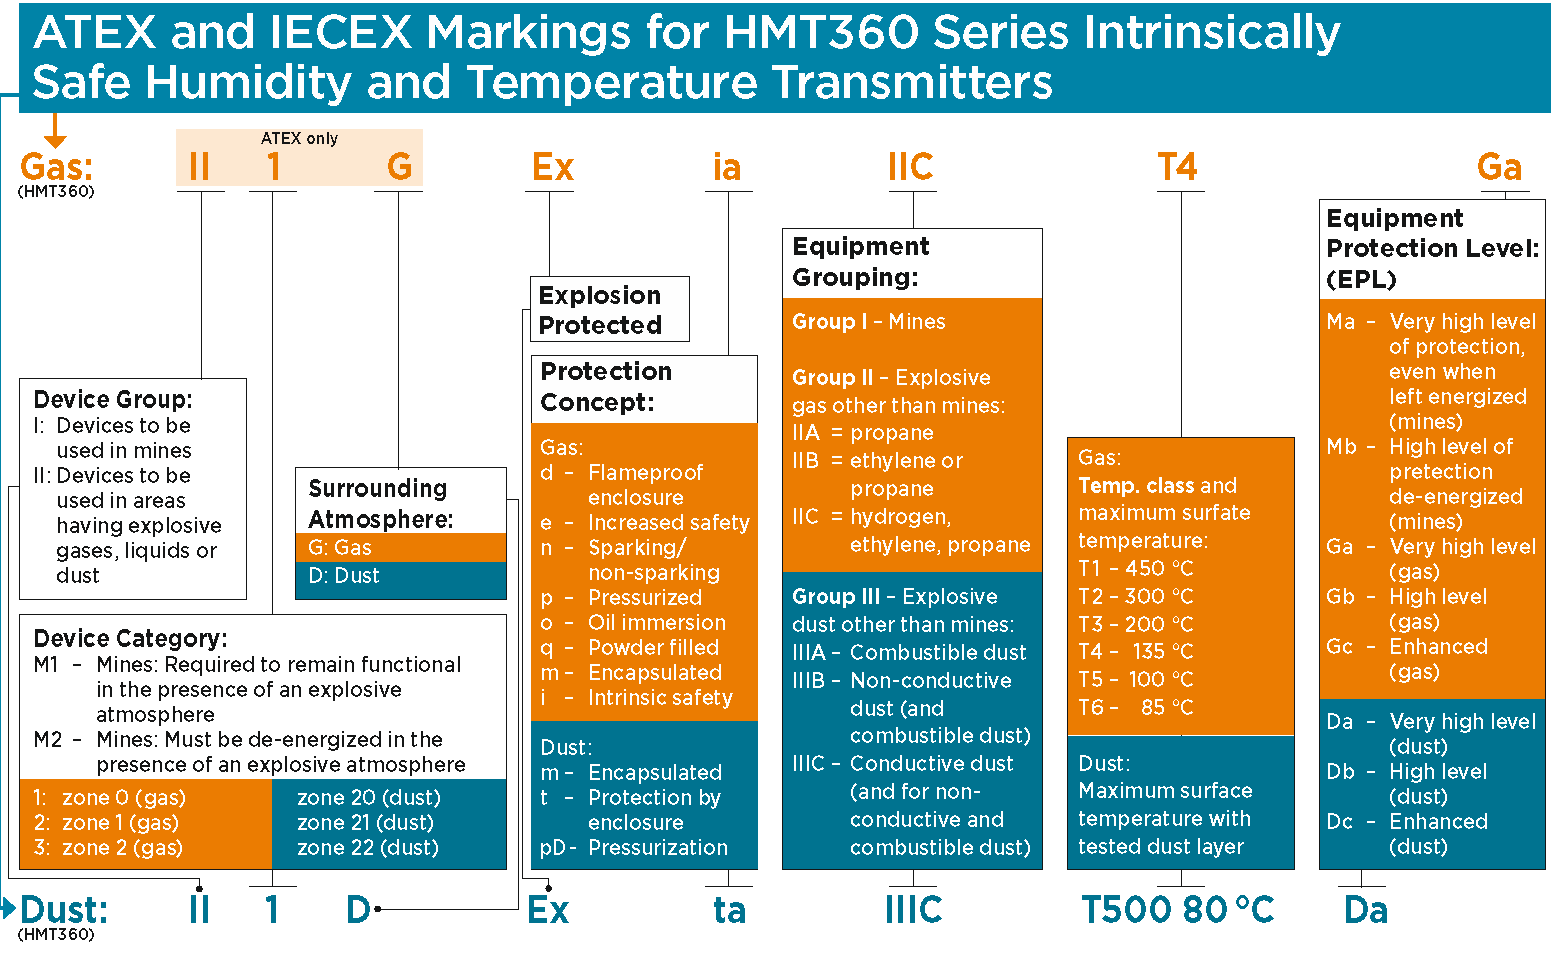 ATEX and IECEX Markings for HMT360 Series Intrinsically Safe Humidity and Temperature Transmitters